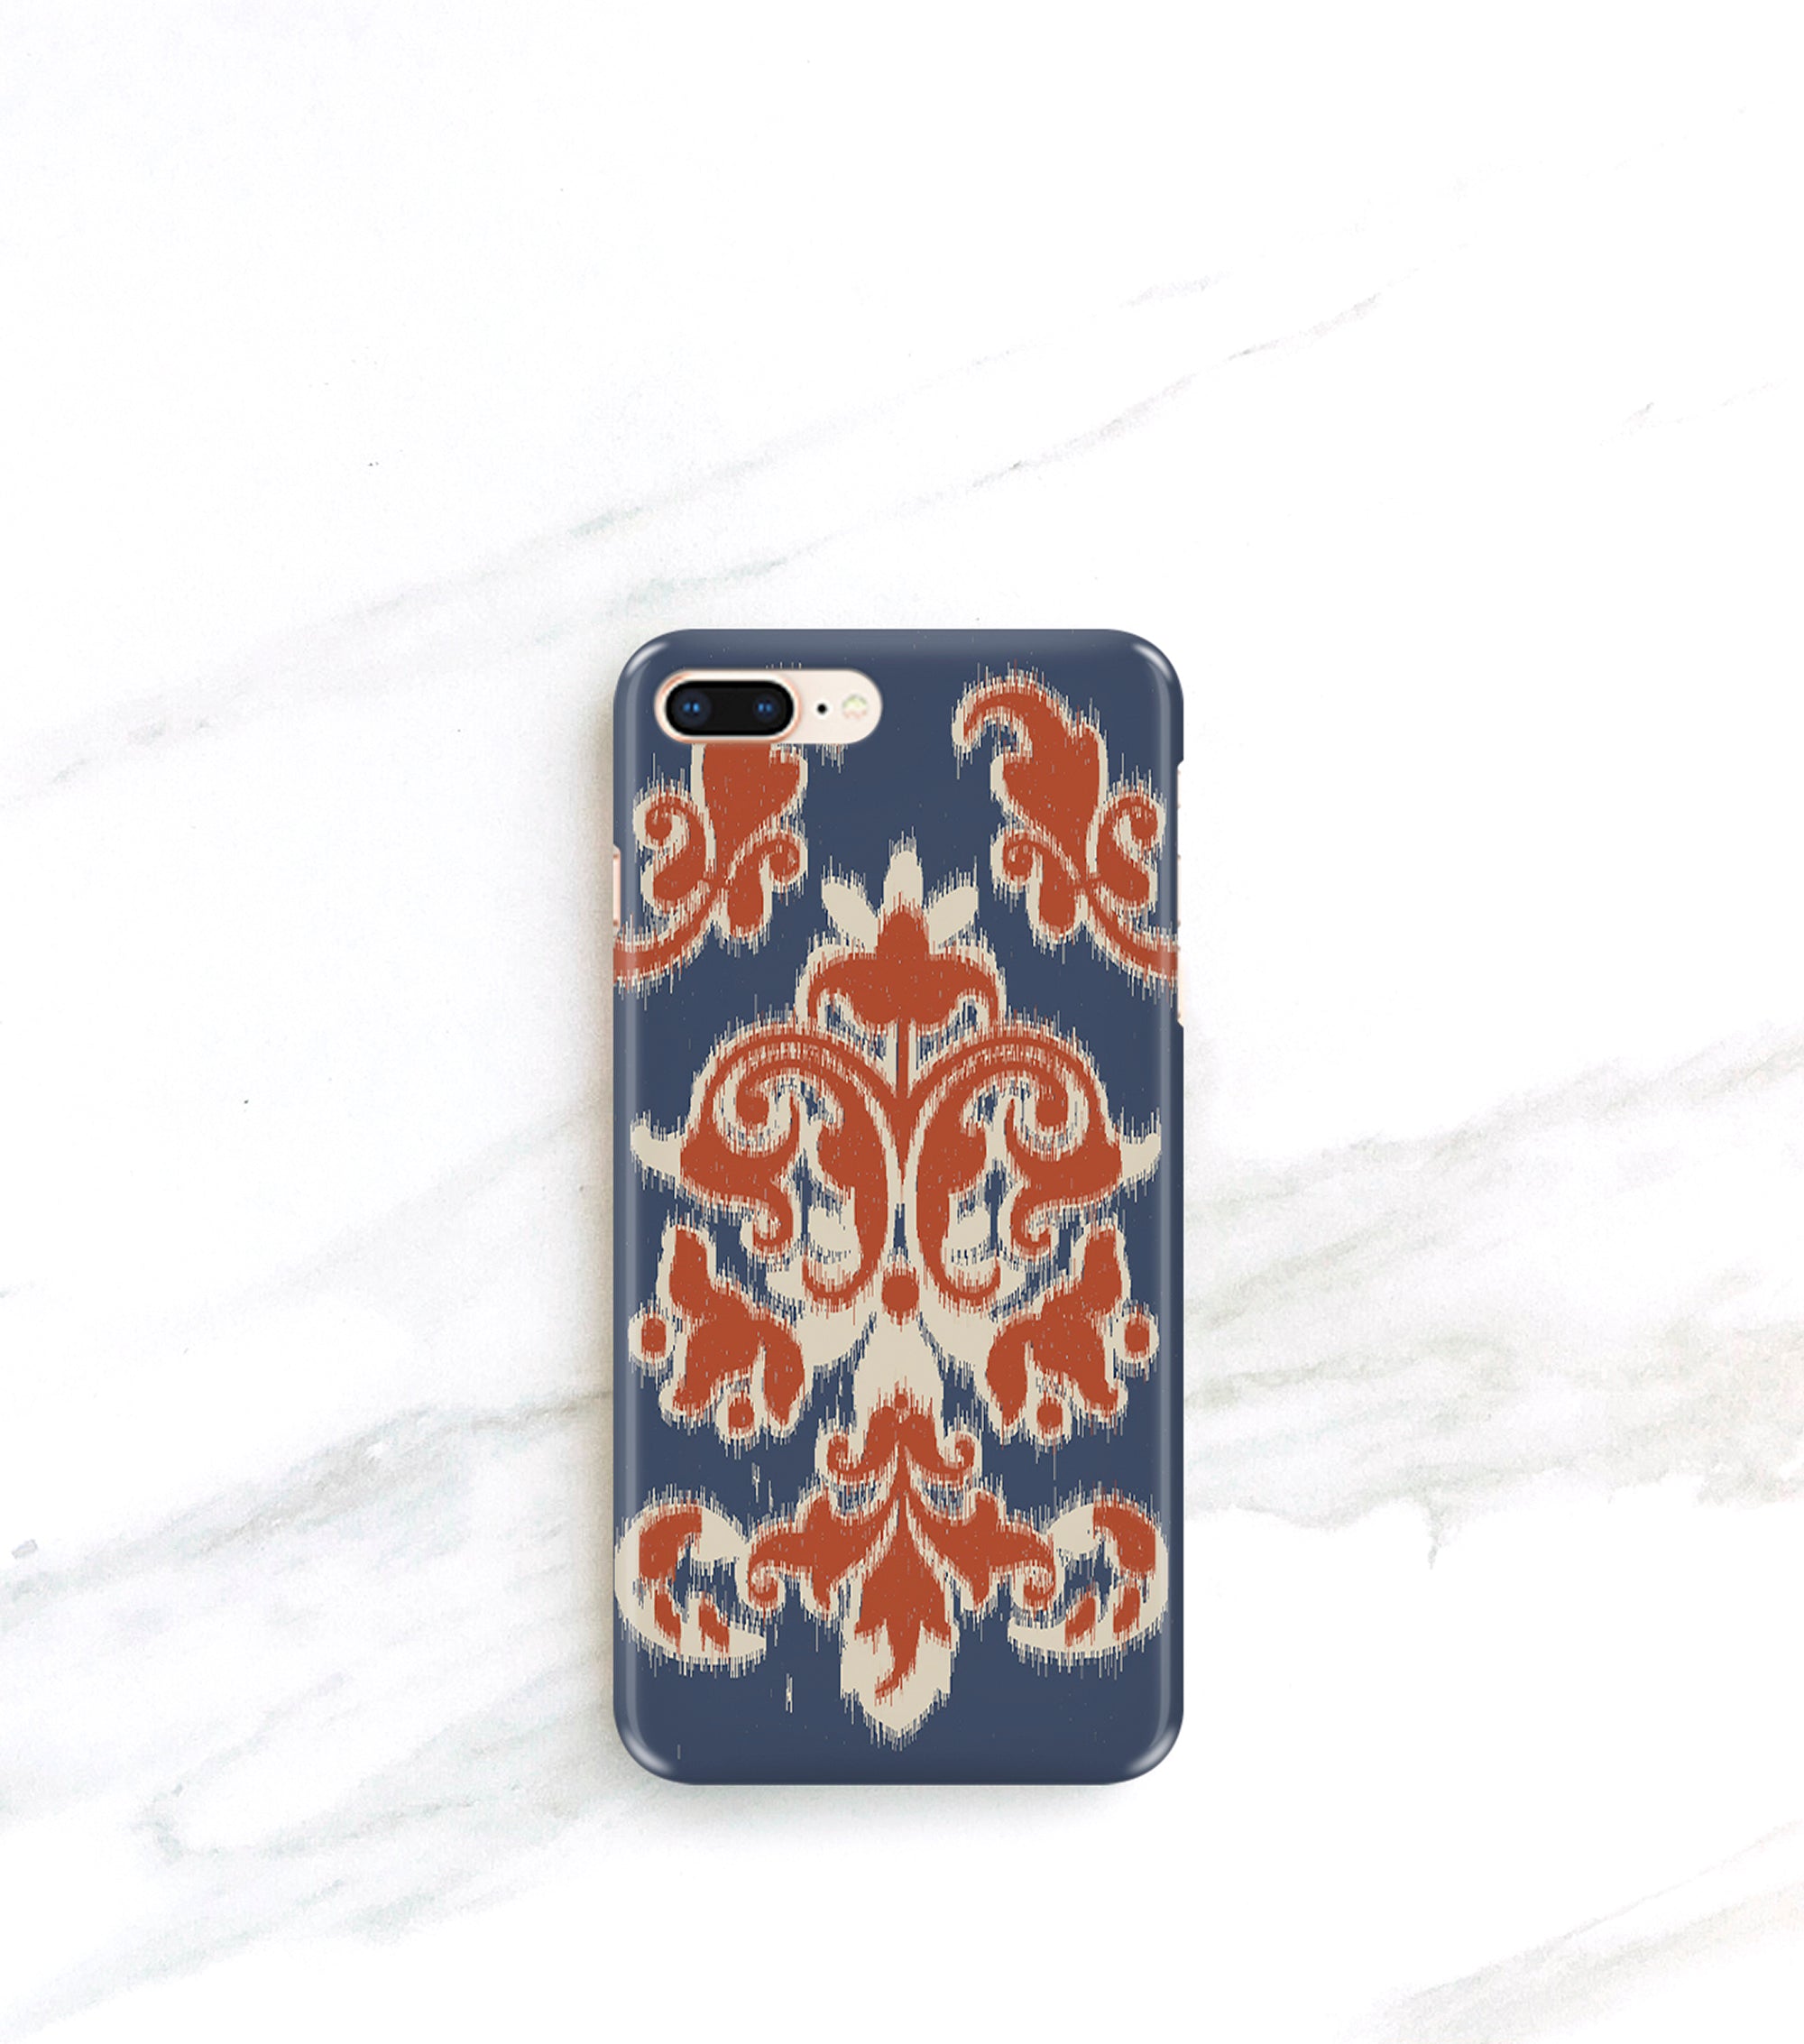 Casual cool iPhone xs case in Ikat print, blue, tan and rust red